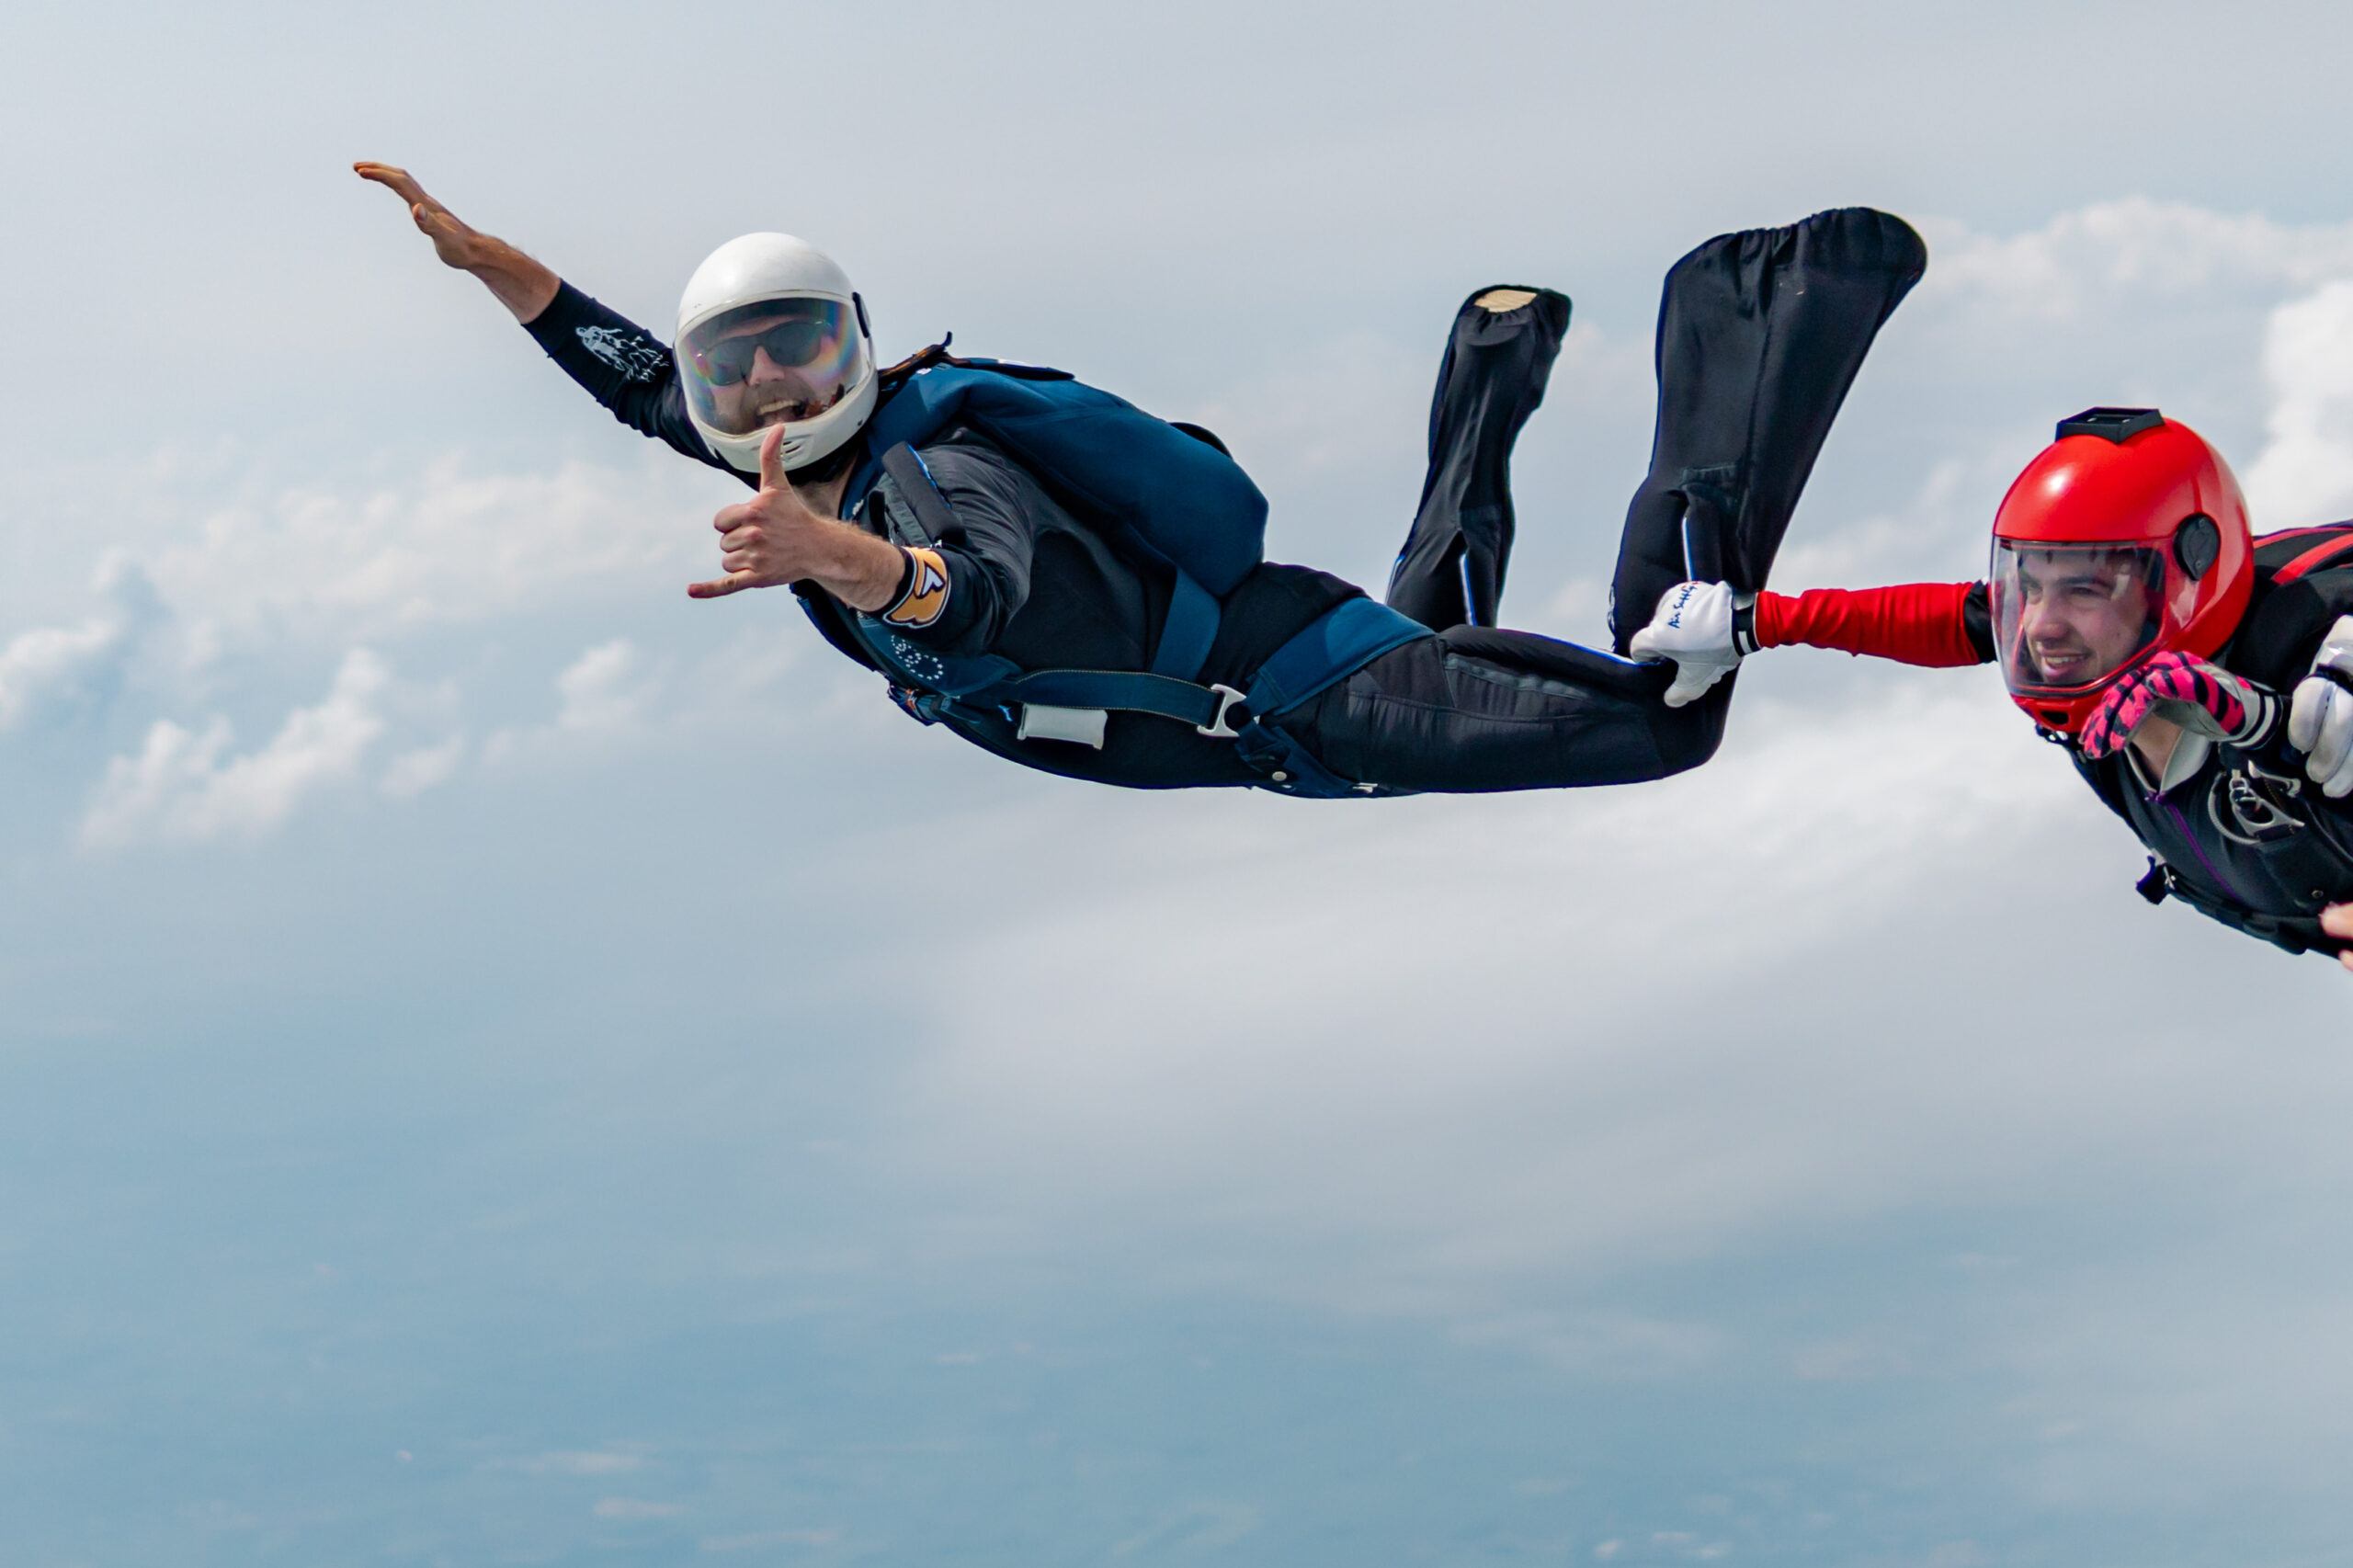 A skydiver posing for a photo mid-jump